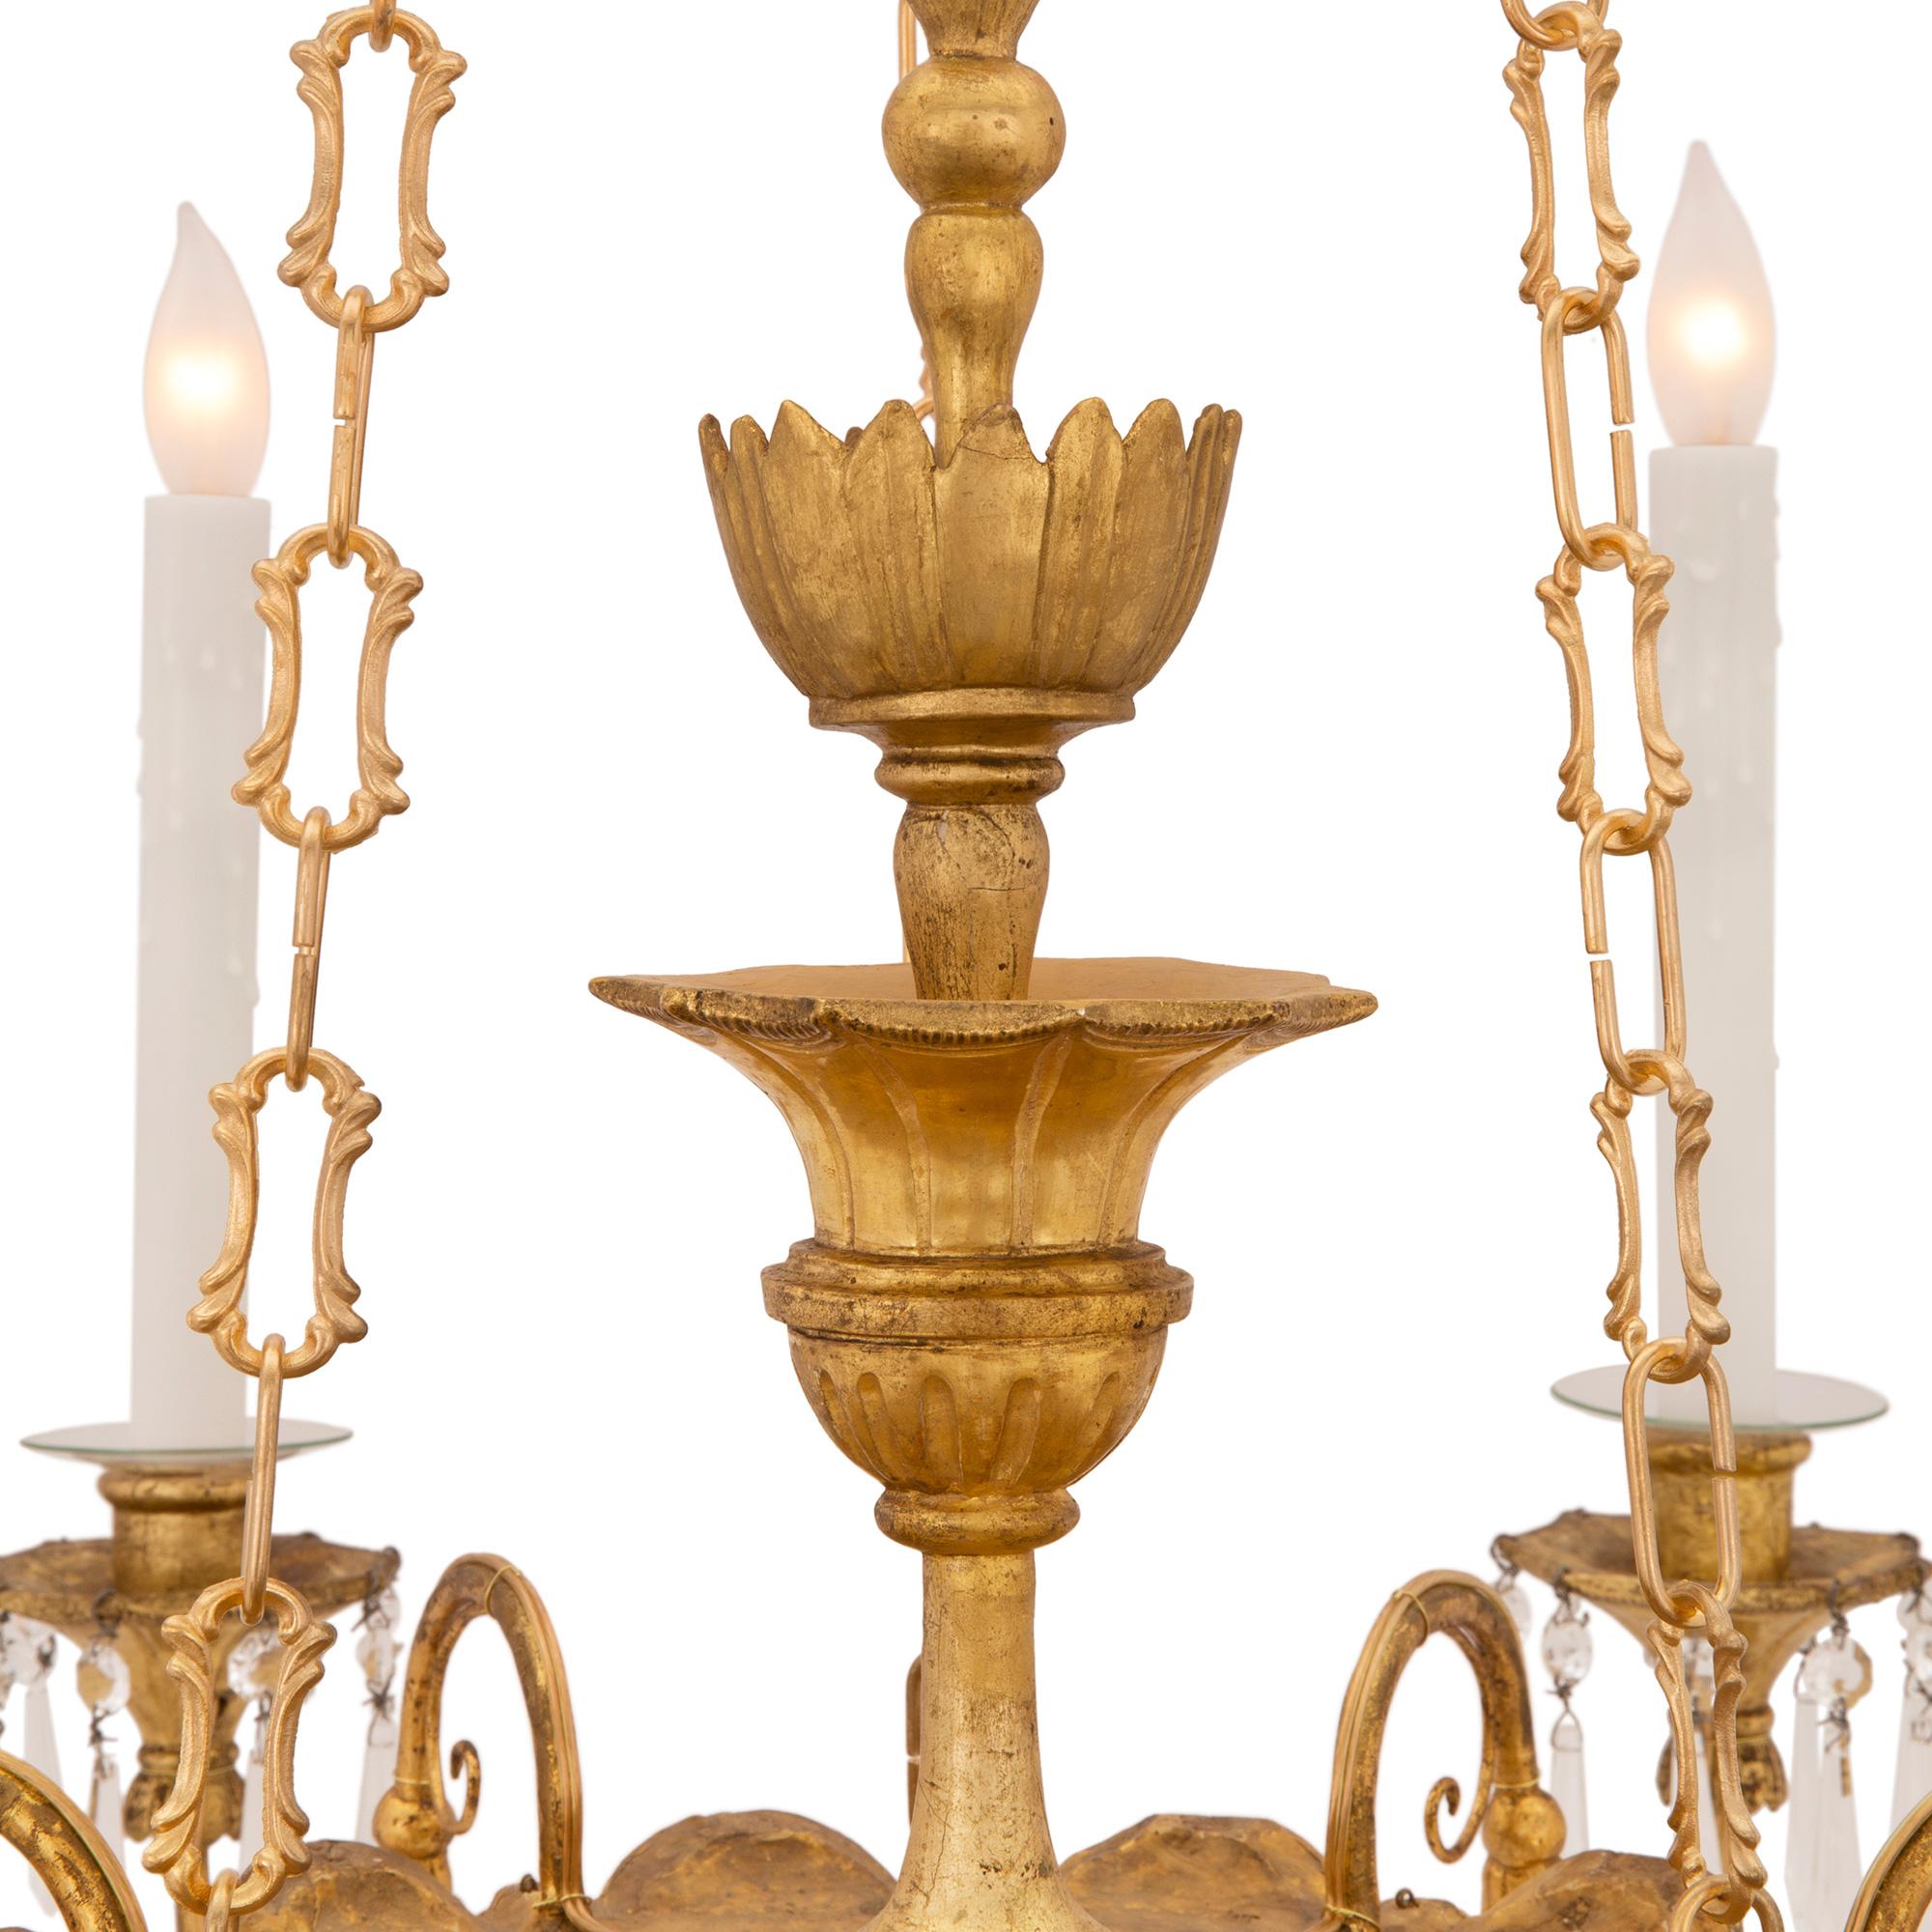 Italian 19th Century Neoclassical Style Giltwood and Ormolu Chandelier For Sale 1